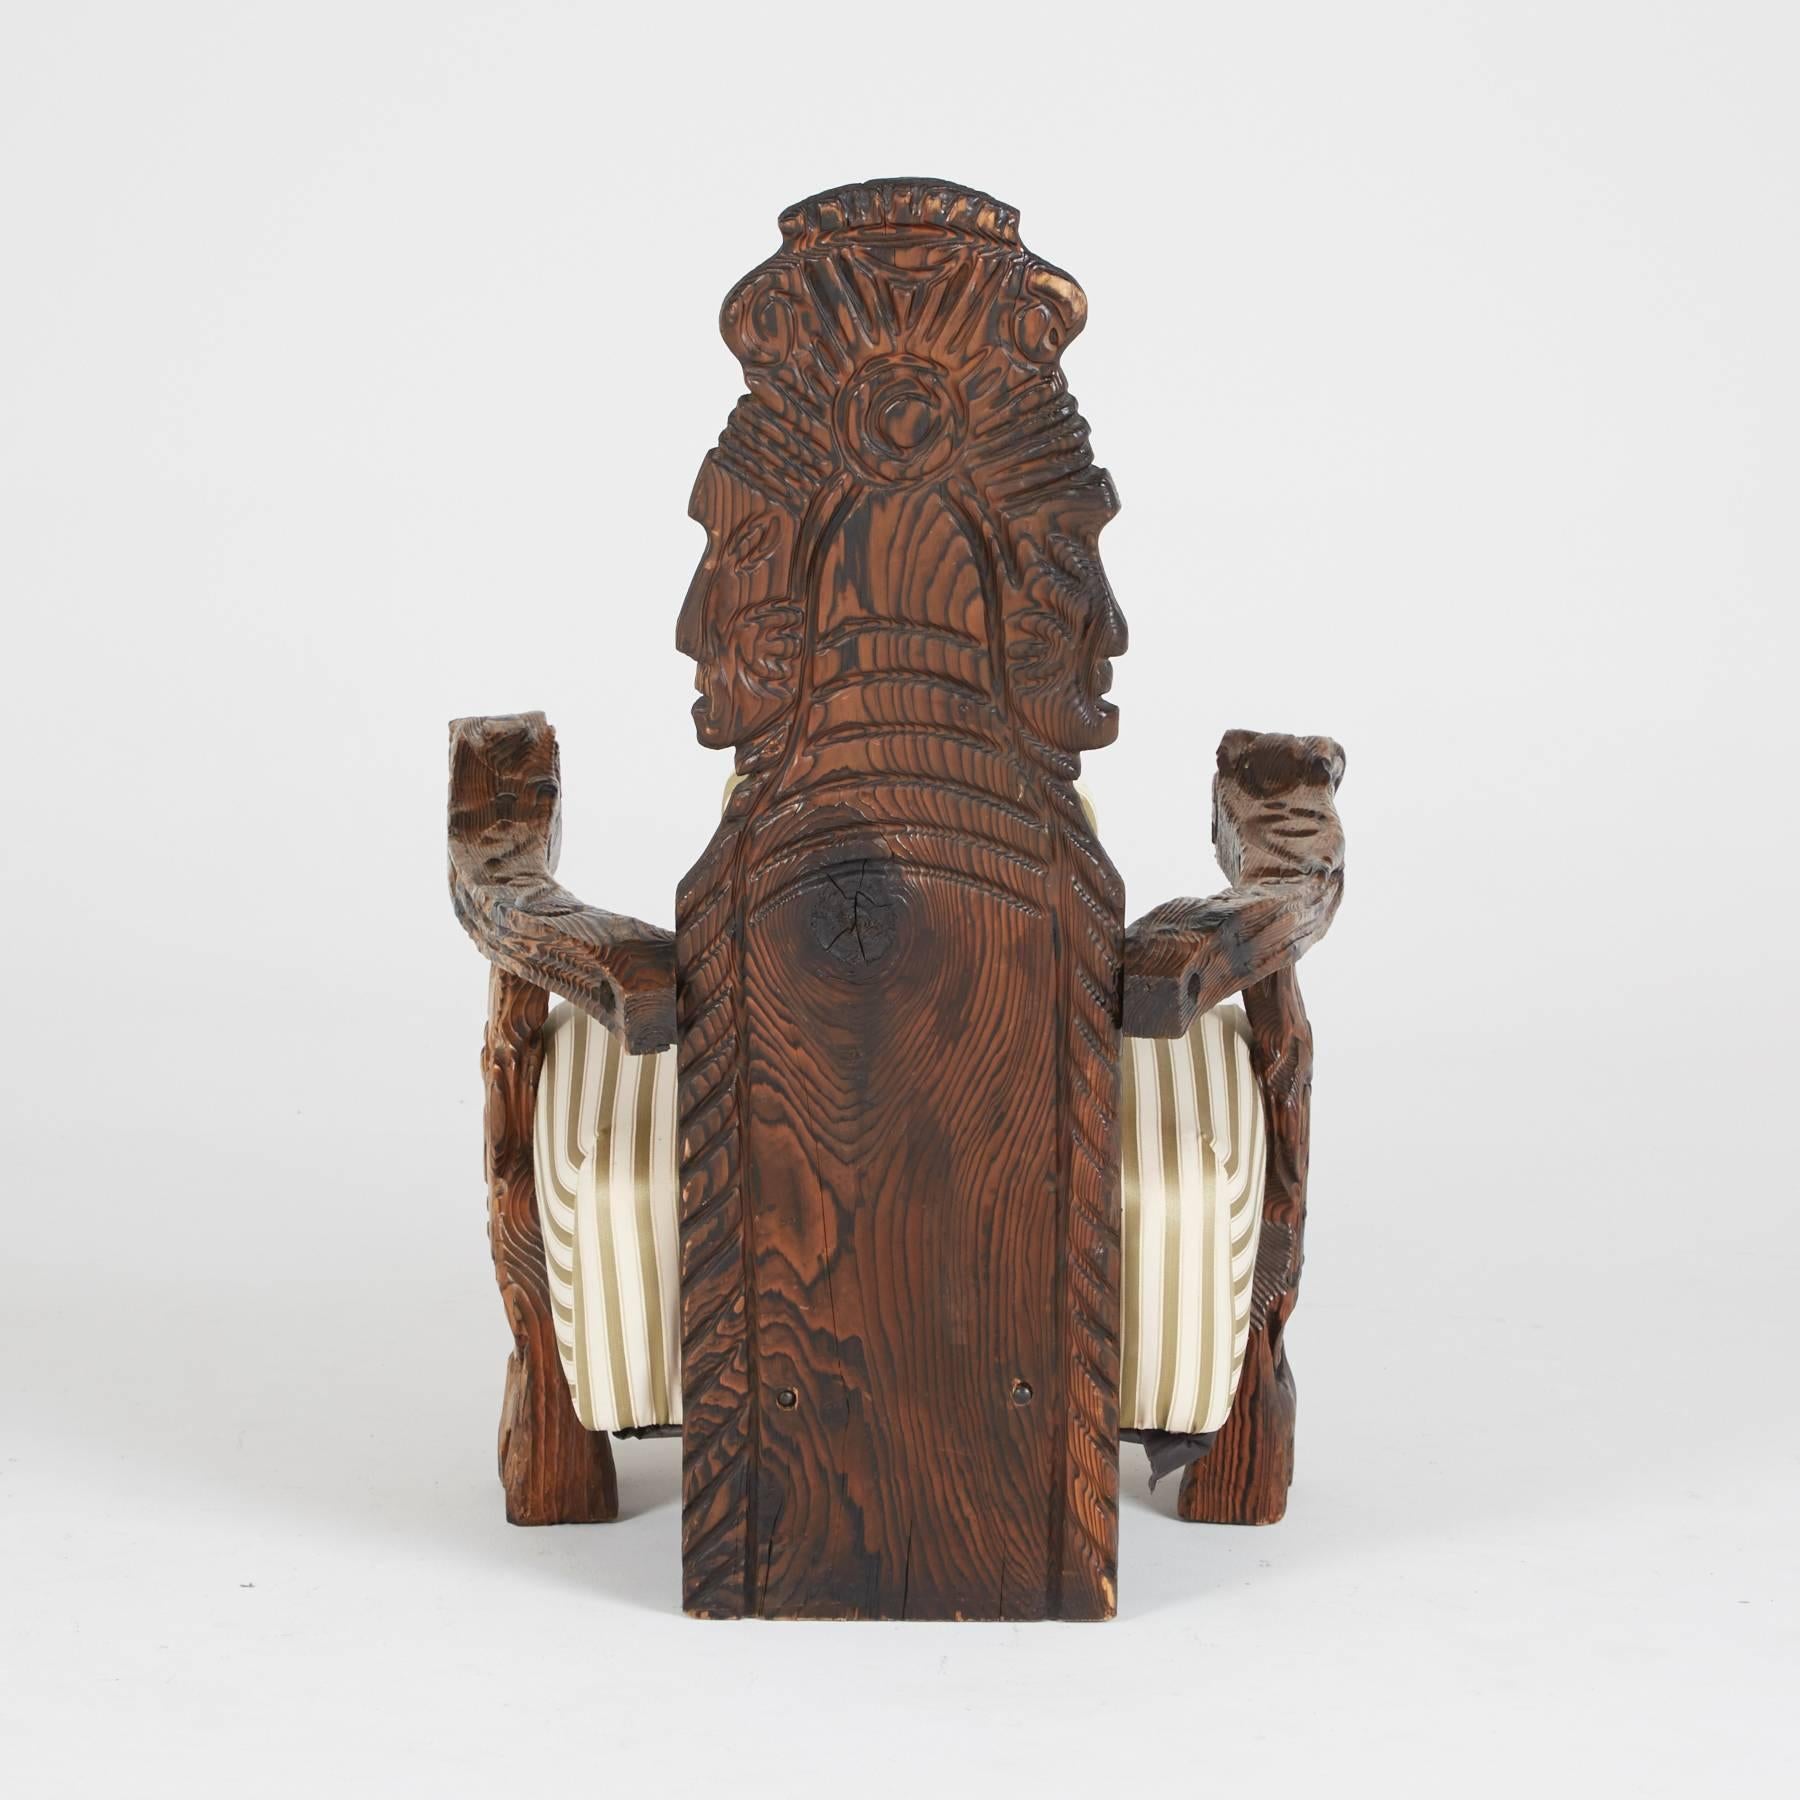 
Sit tall and regal on a piece of American history with this exotic throne, crafted in true Modern primitive style. Deep, red walnut is turned into a work of art, with carved details on the arms and back depicting Polynesian deities.

William